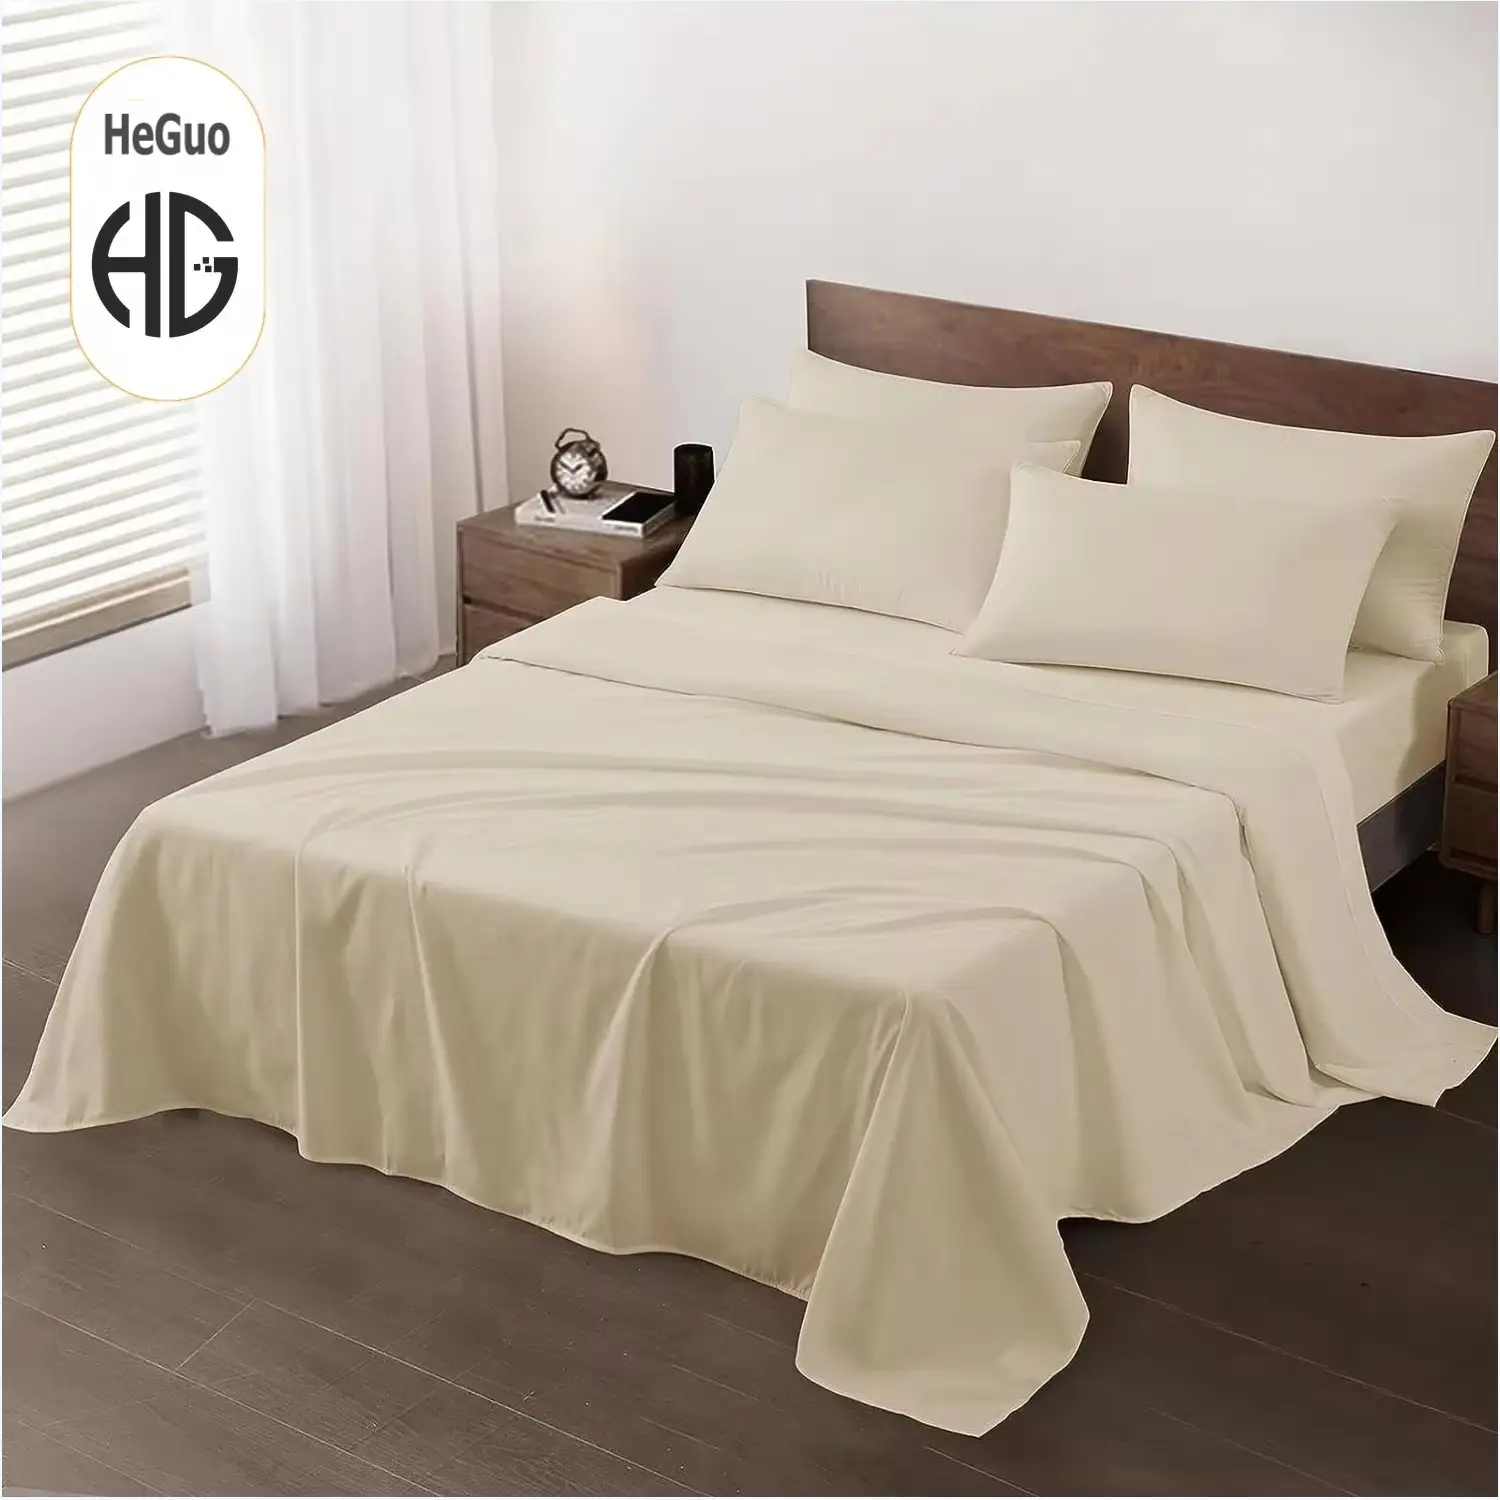 Customized Egyptian Cotton Bedding Sheets For Queen Size Bedding Sets